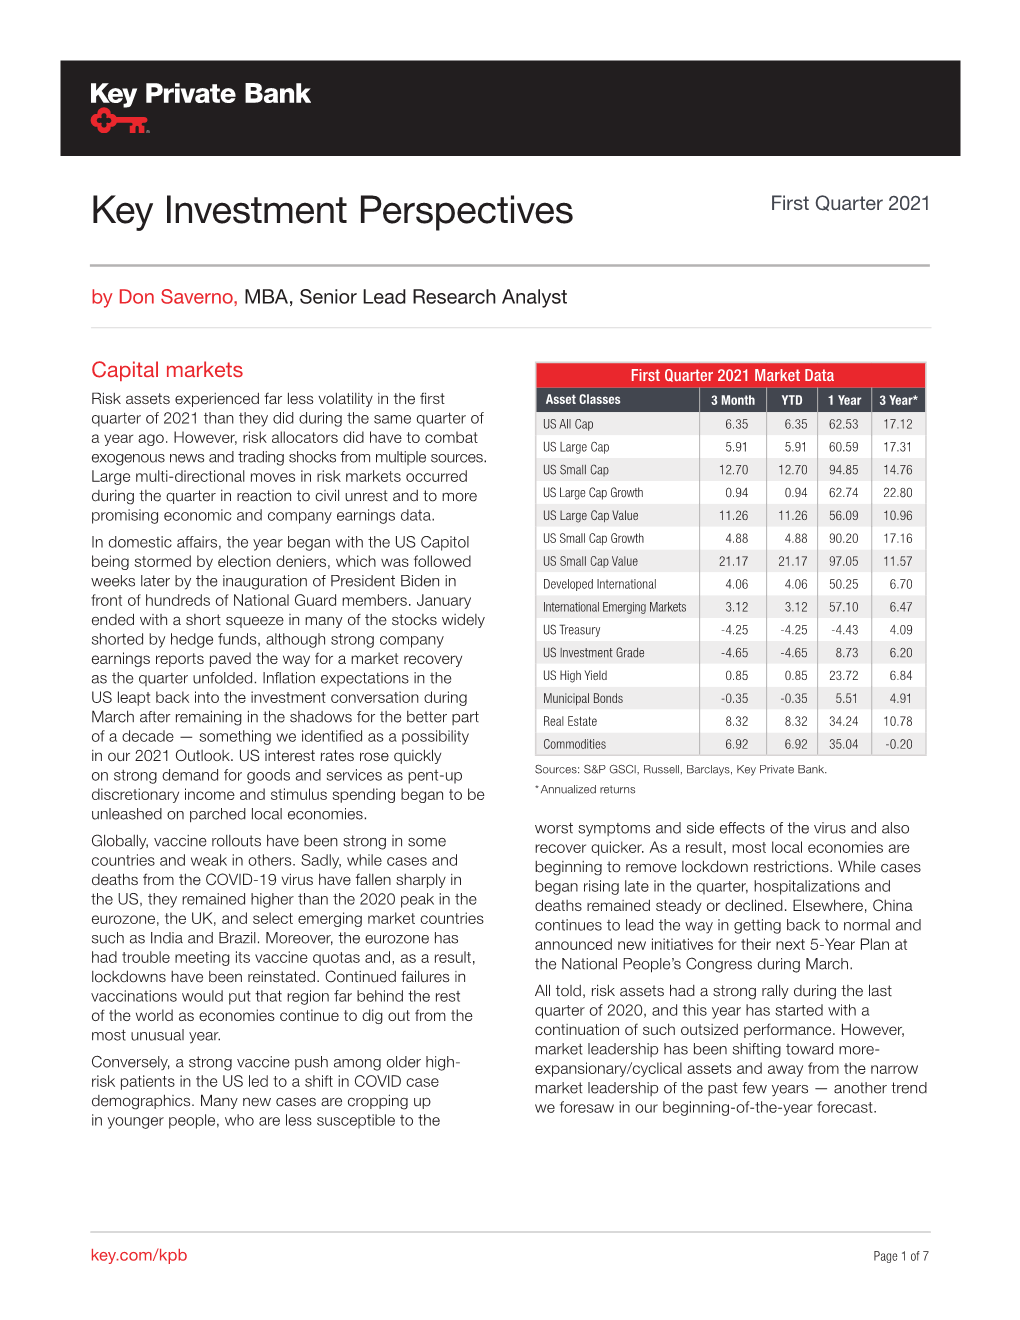 Key Investment Perspectives First Quarter 2021 by Don Saverno, MBA, Senior Lead Research Analyst